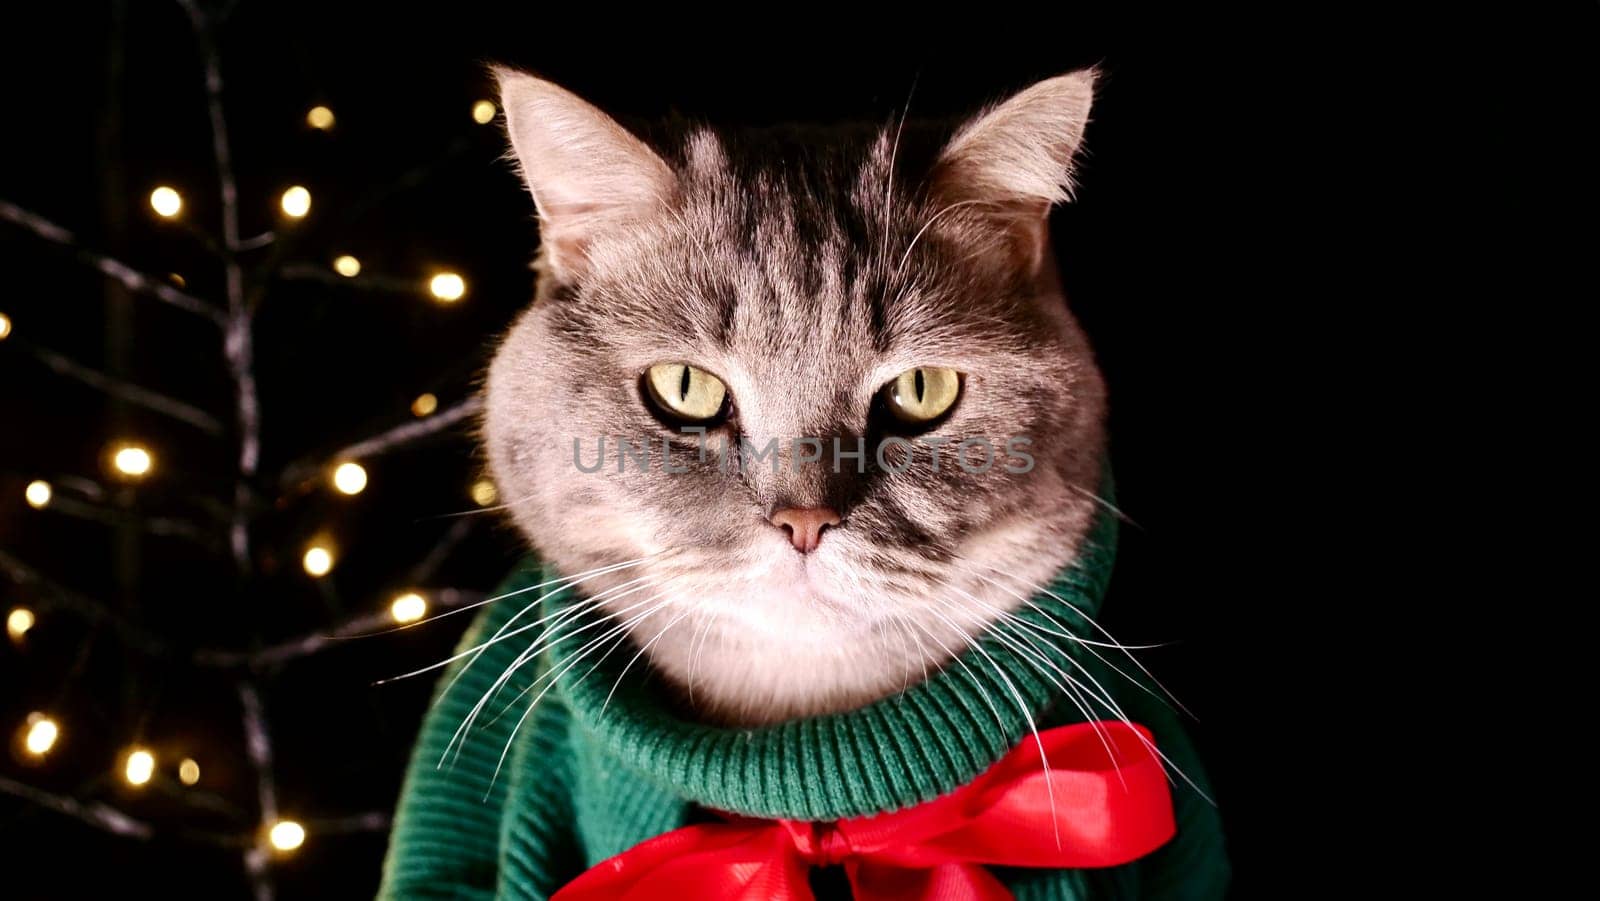 Scottish straight eared cat in green sweater and red tie bow on Happy New Year's holiday, celebrating Merry Christmas. Pet sitting on the black background